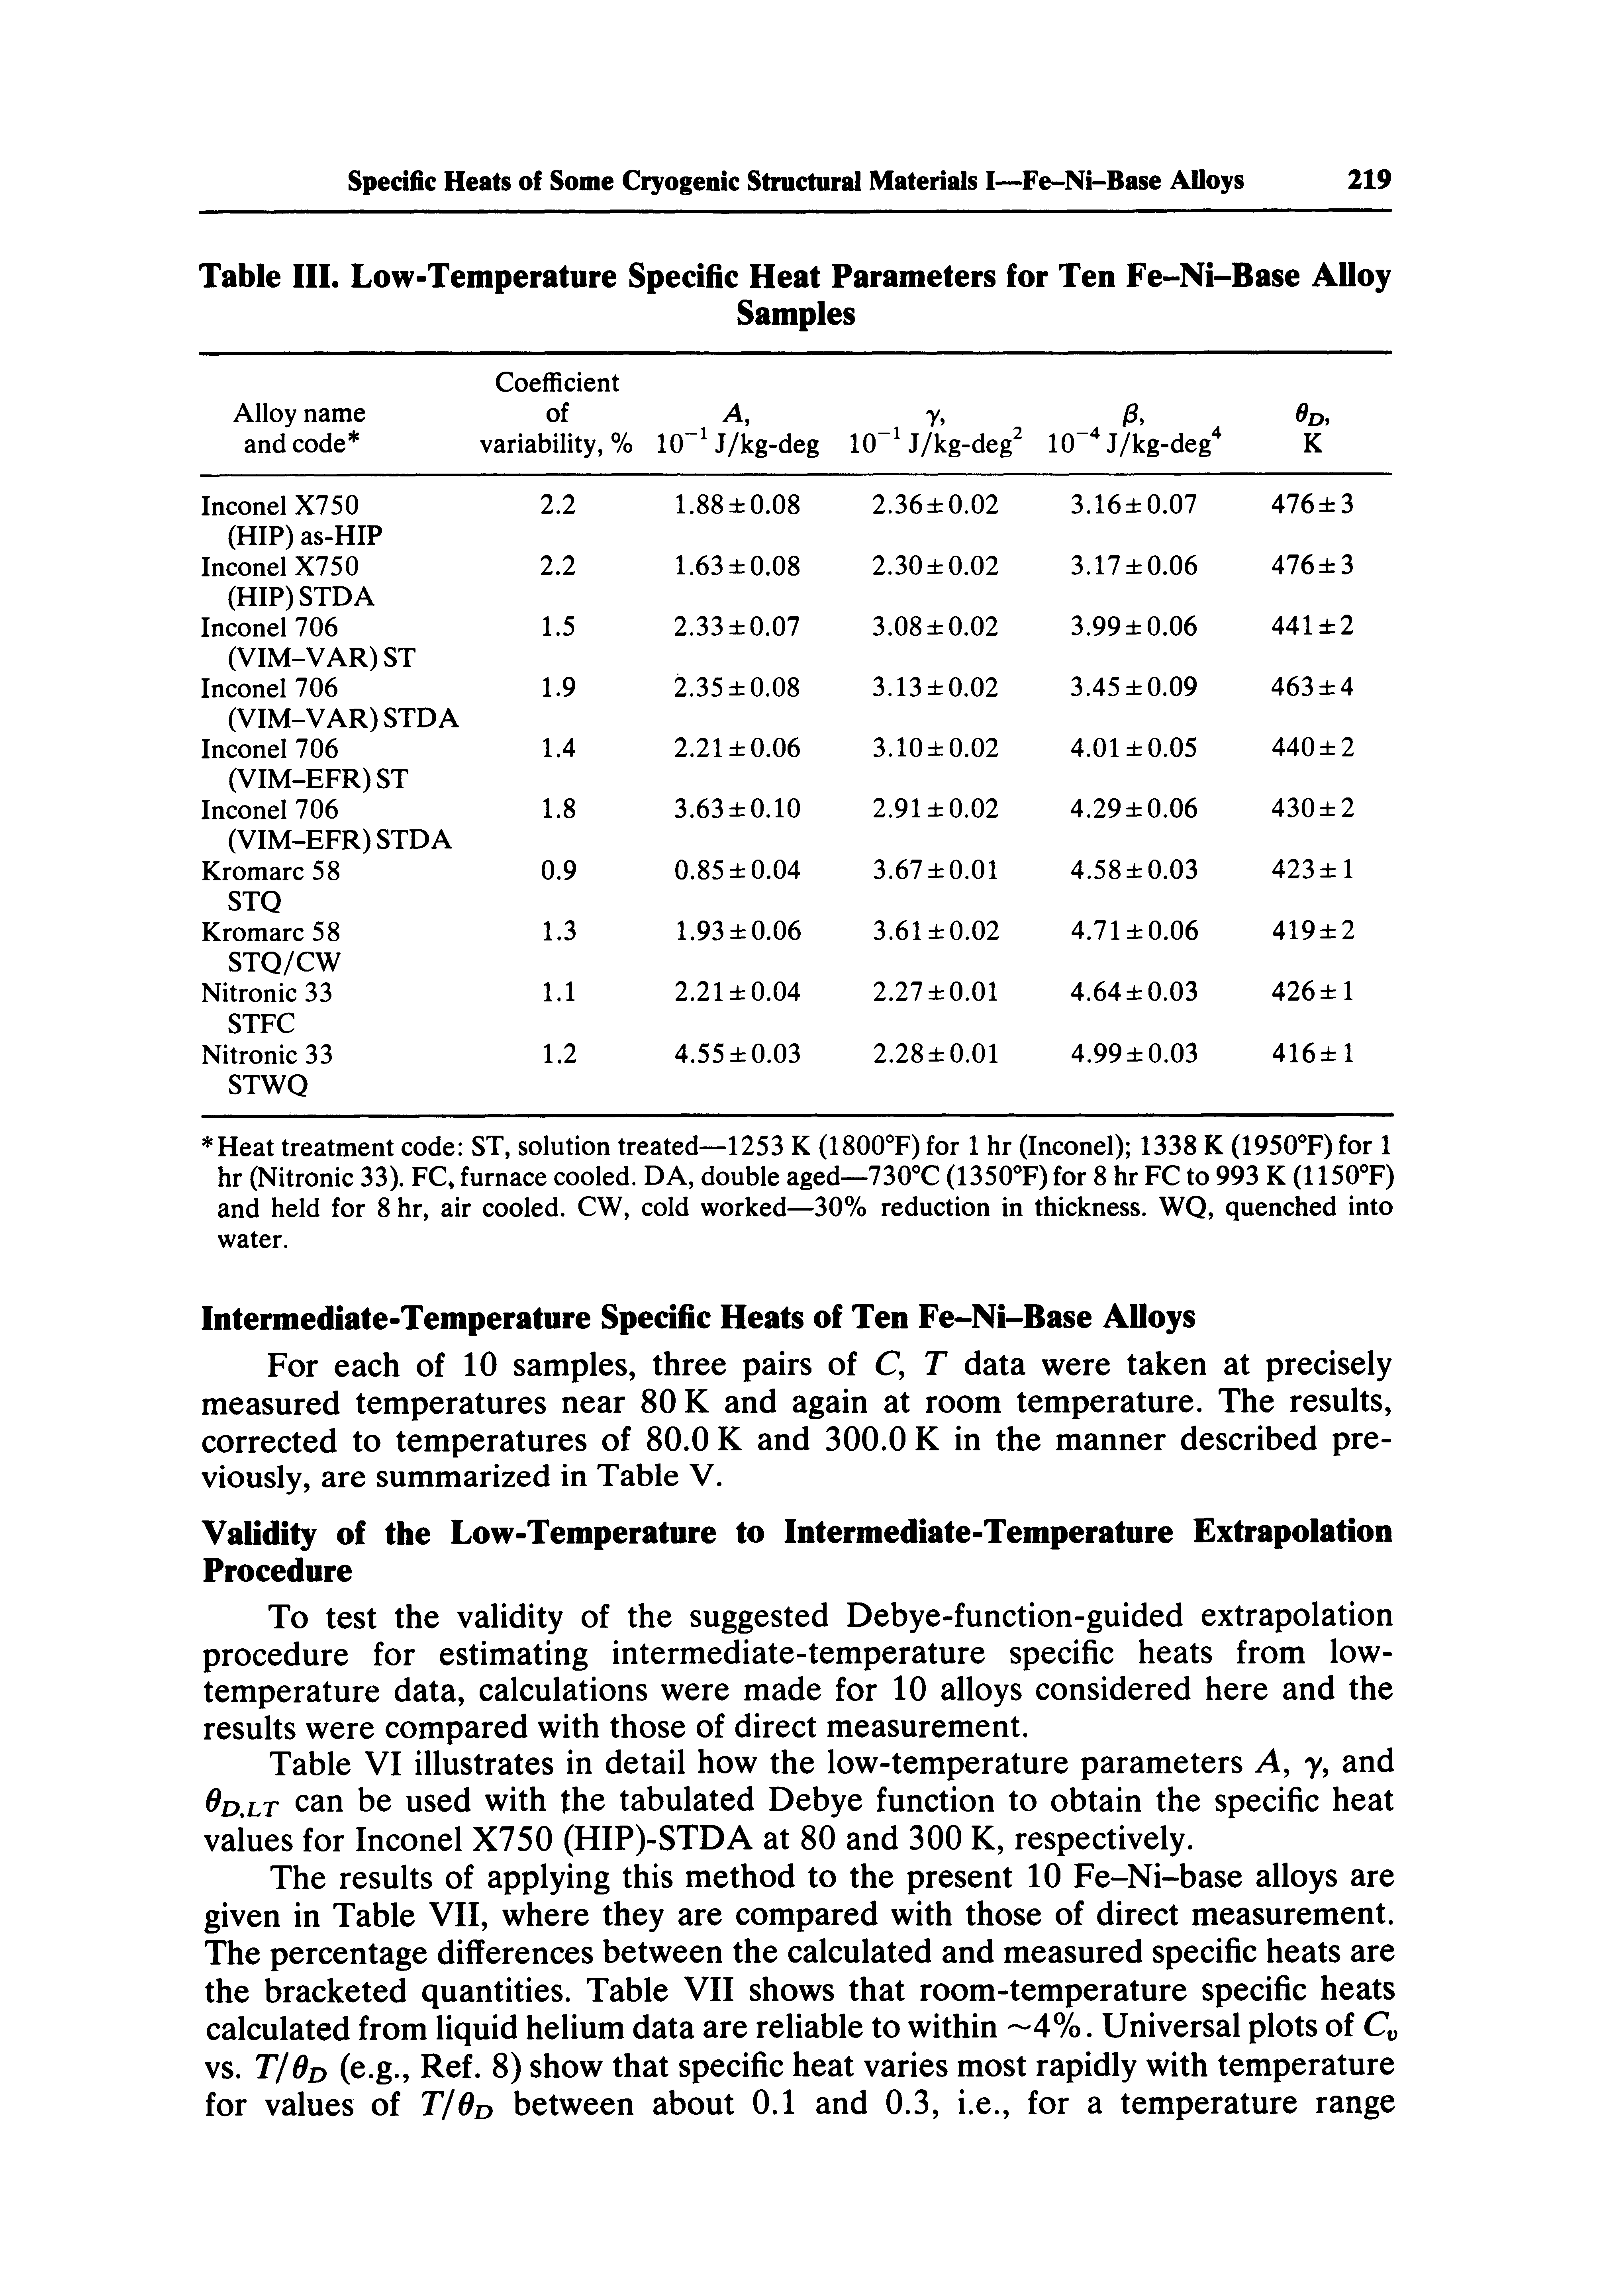 Table VI illustrates in detail how the low-temperature parameters A, y, and D.LT can be used with the tabulated Debye function to obtain the specific heat values for Inconel X750 (HIP)-STDA at 80 and 300 K, respectively.